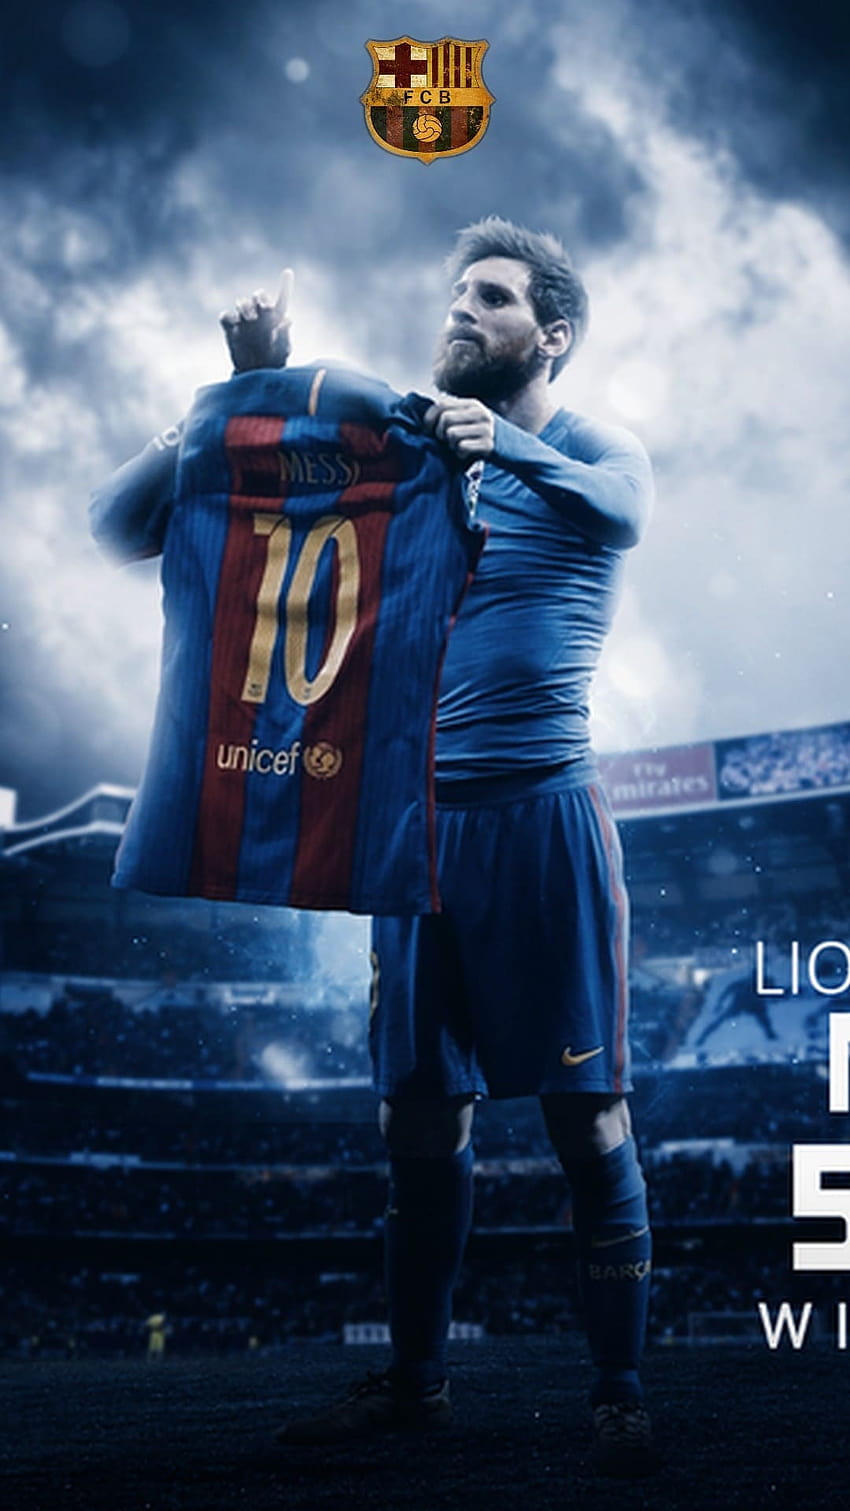 Lionel Messi Mobile Backgrounds, メッシの電話 HD電話の壁紙